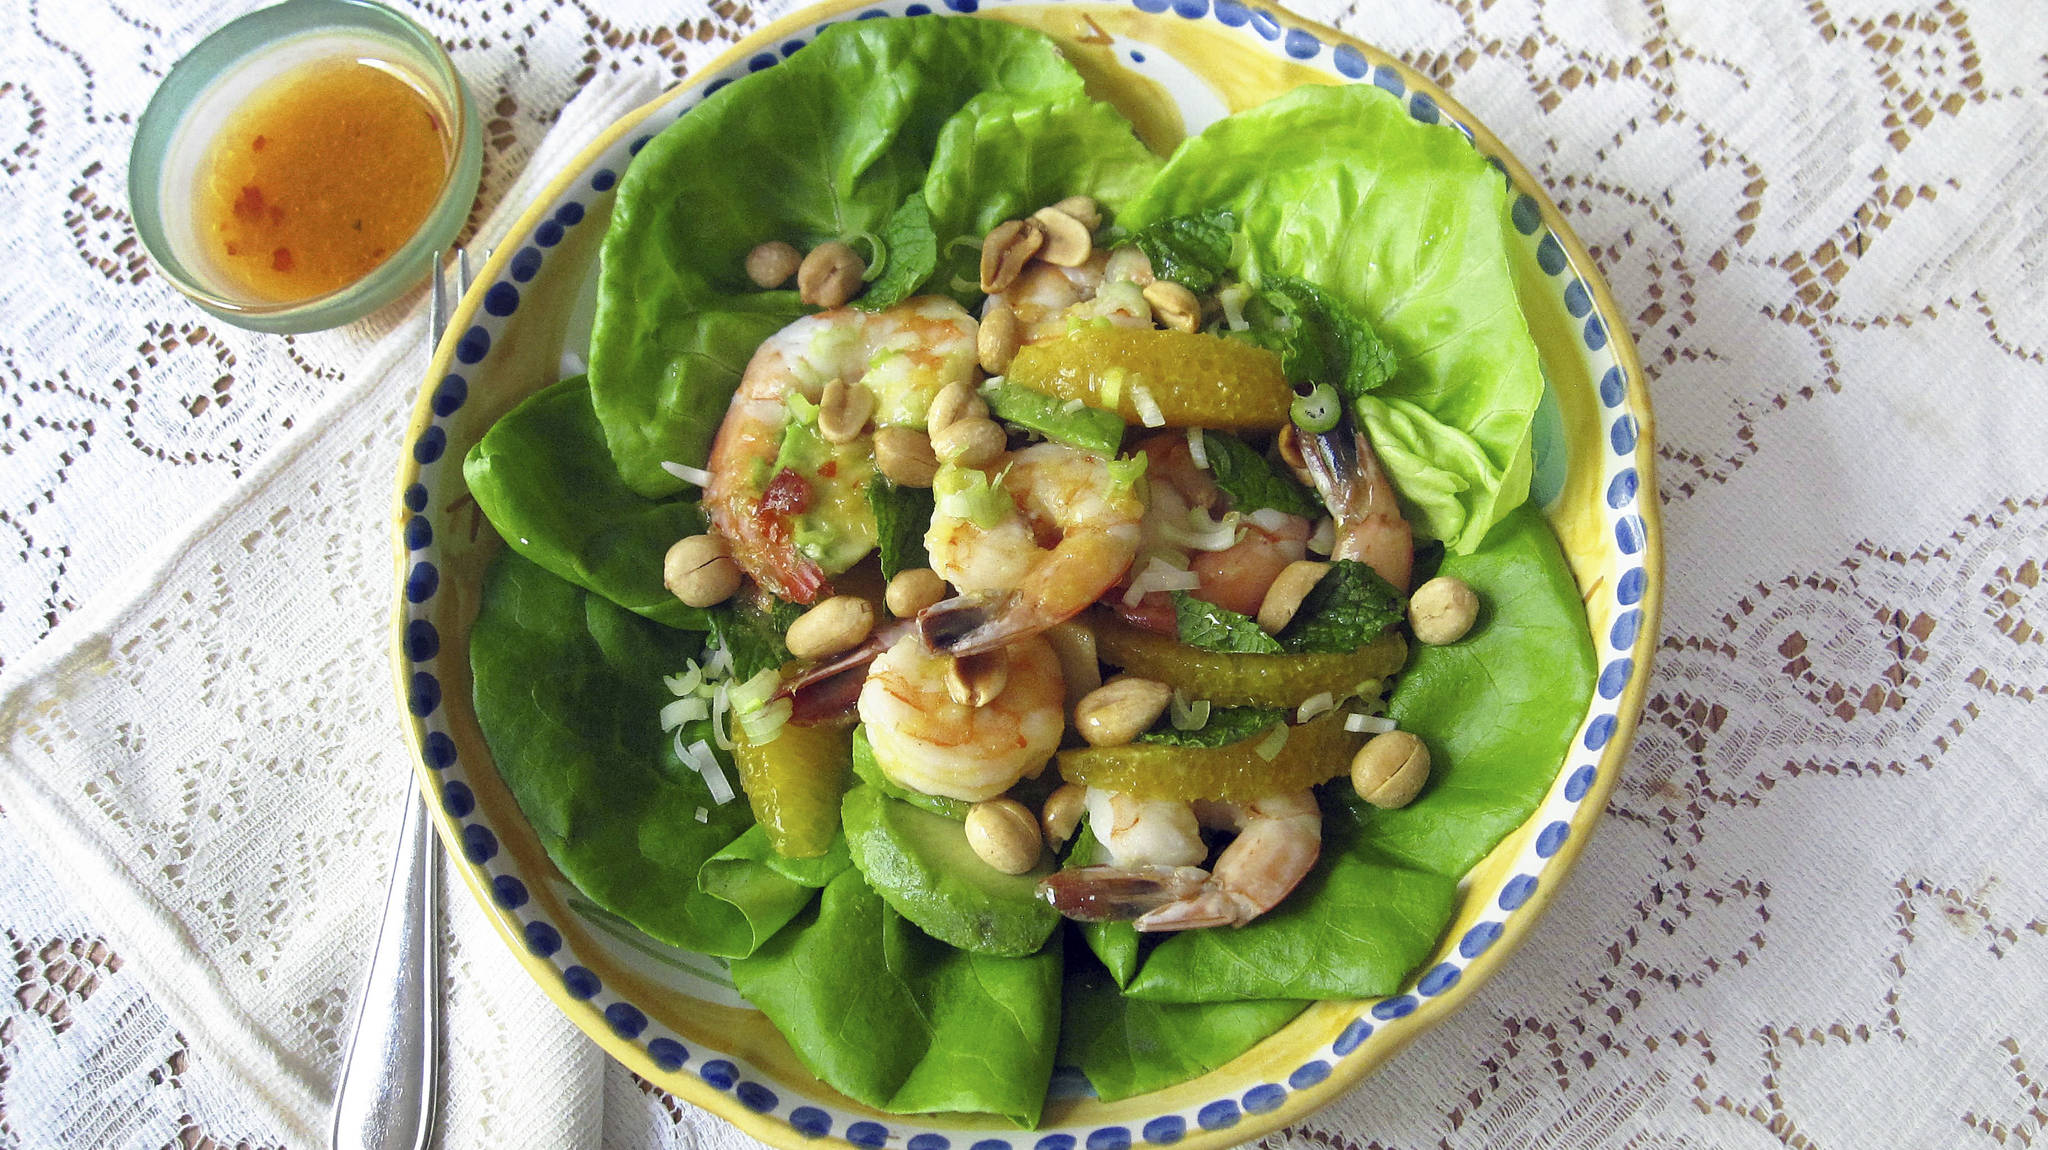 This June 15 photo shows a shrimp, avocado and orange salad with spicy orange dressing in New York. This dish is from a recipe by Sara Moulton. (Sara Moulton via AP)